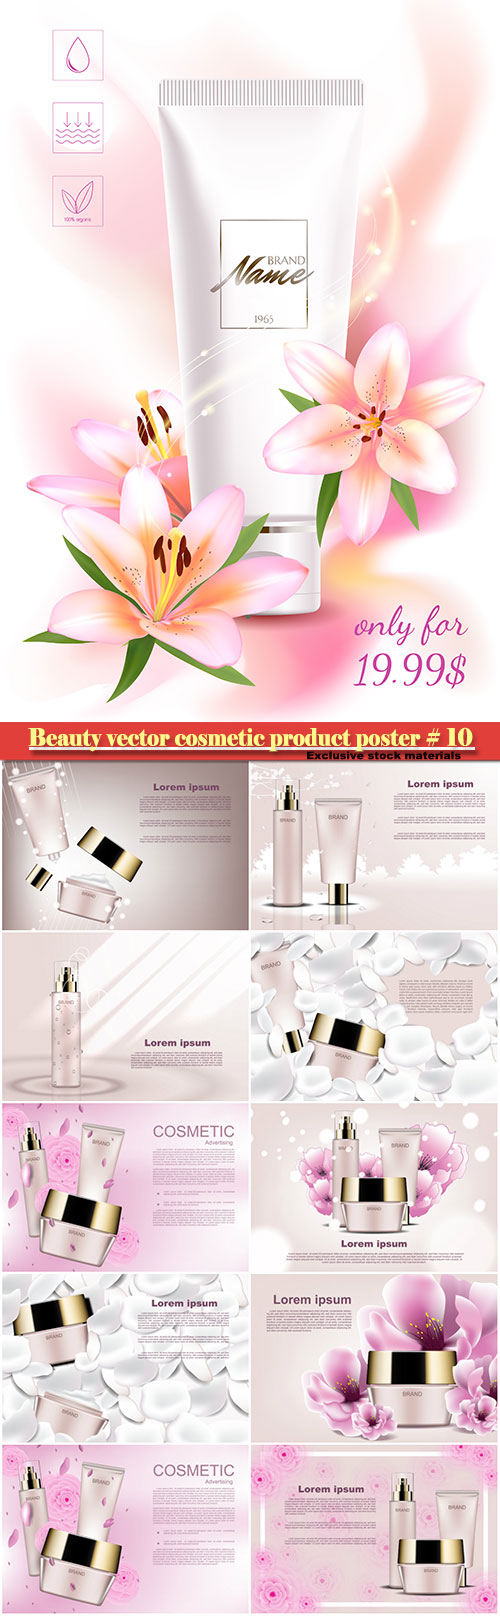 Beauty vector cosmetic product poster # 10